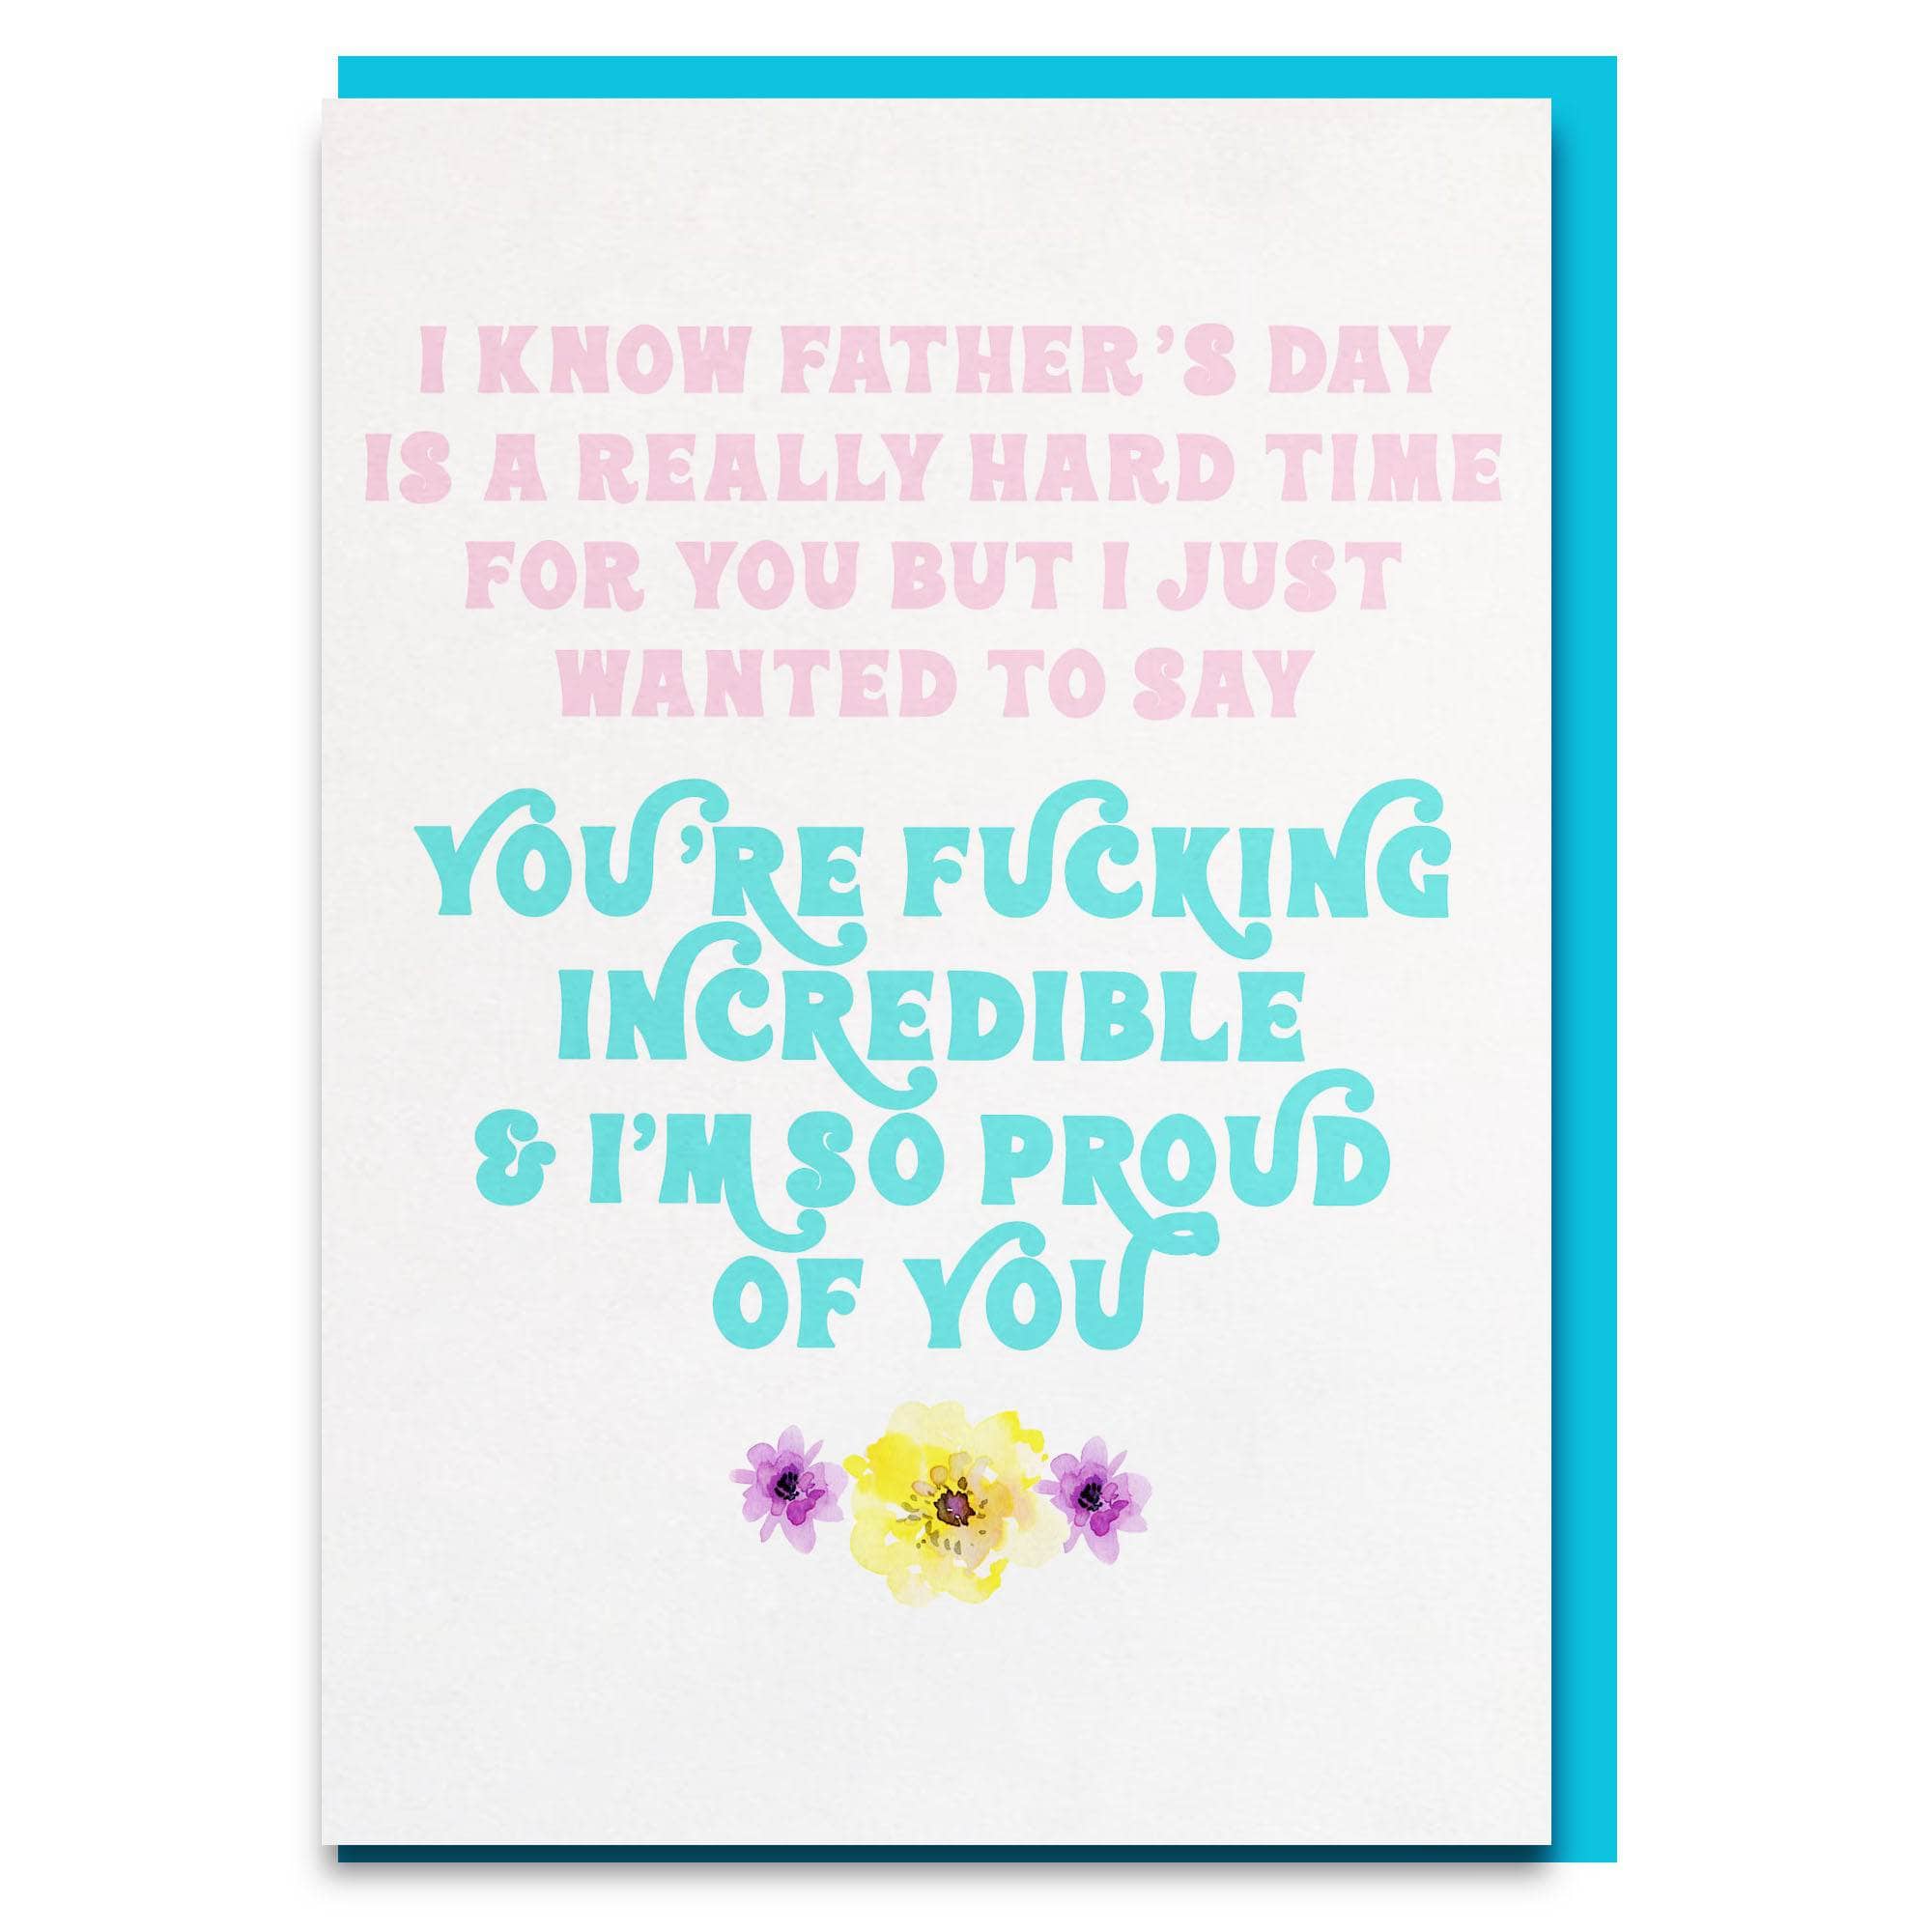 Thinking of you card for friend or loved dealing with loss this Father's Day. 